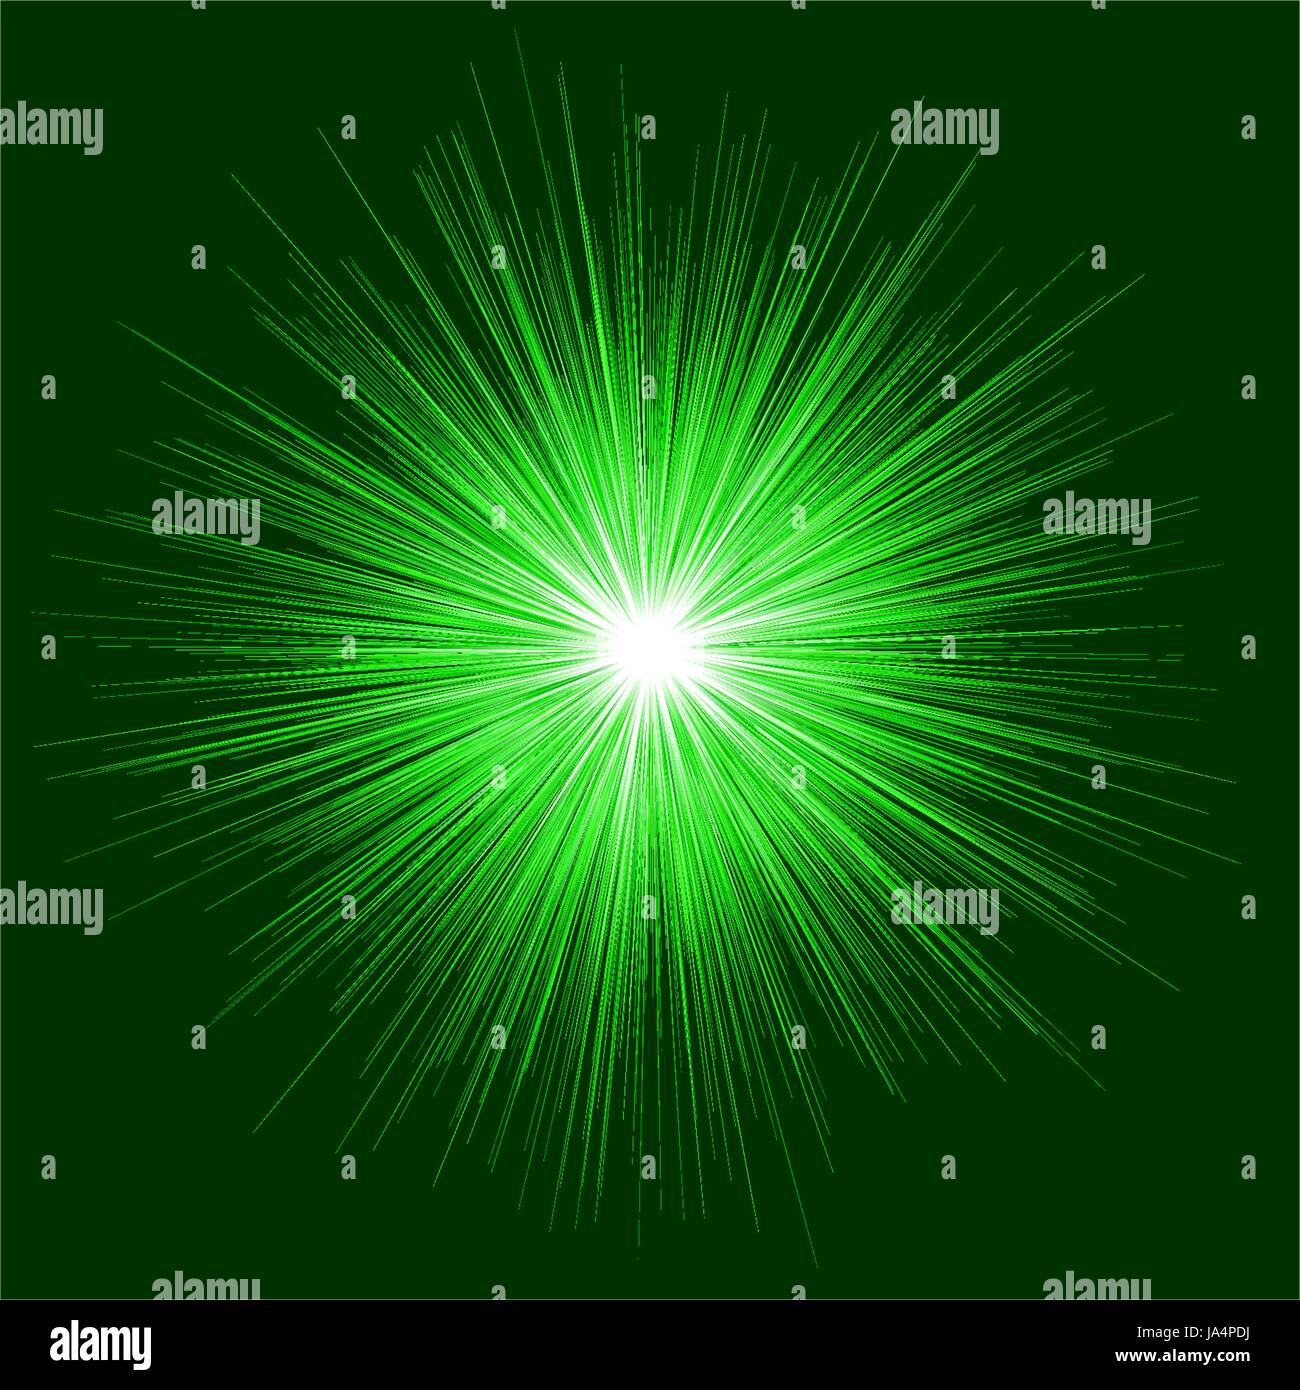 Green abstract explosion graphic background Stock Vector